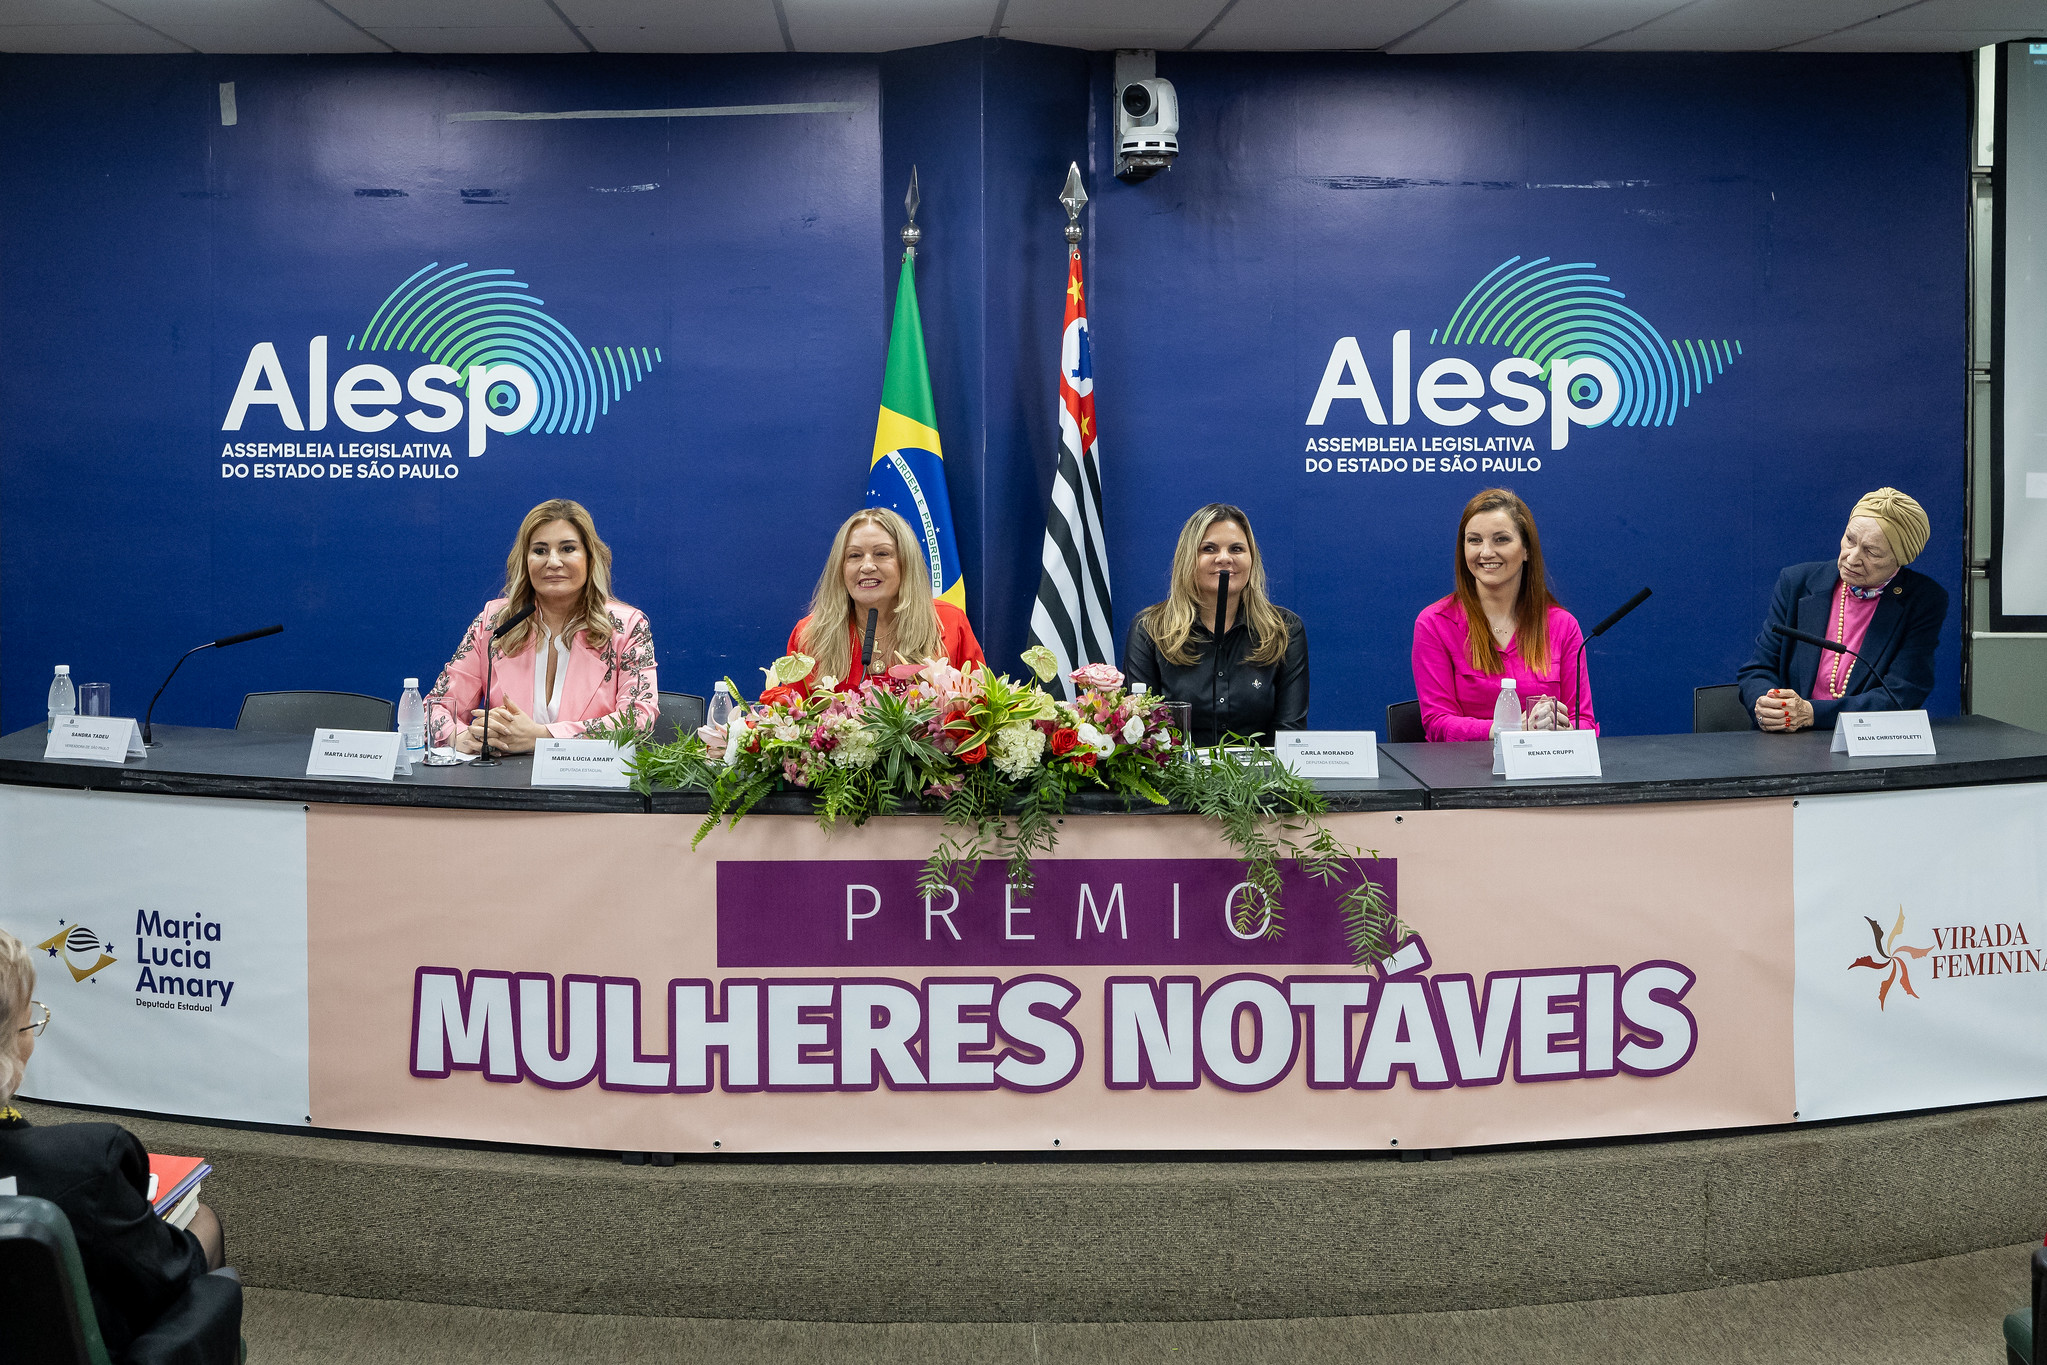 1 edio Prmio Mulheres Notveis<a style='float:right' href='https://www3.al.sp.gov.br/repositorio/noticia/N-03-2024/fg321488.jpg' target=_blank><img src='/_img/material-file-download-white.png' width='14px' alt='Clique para baixar a imagem'></a>